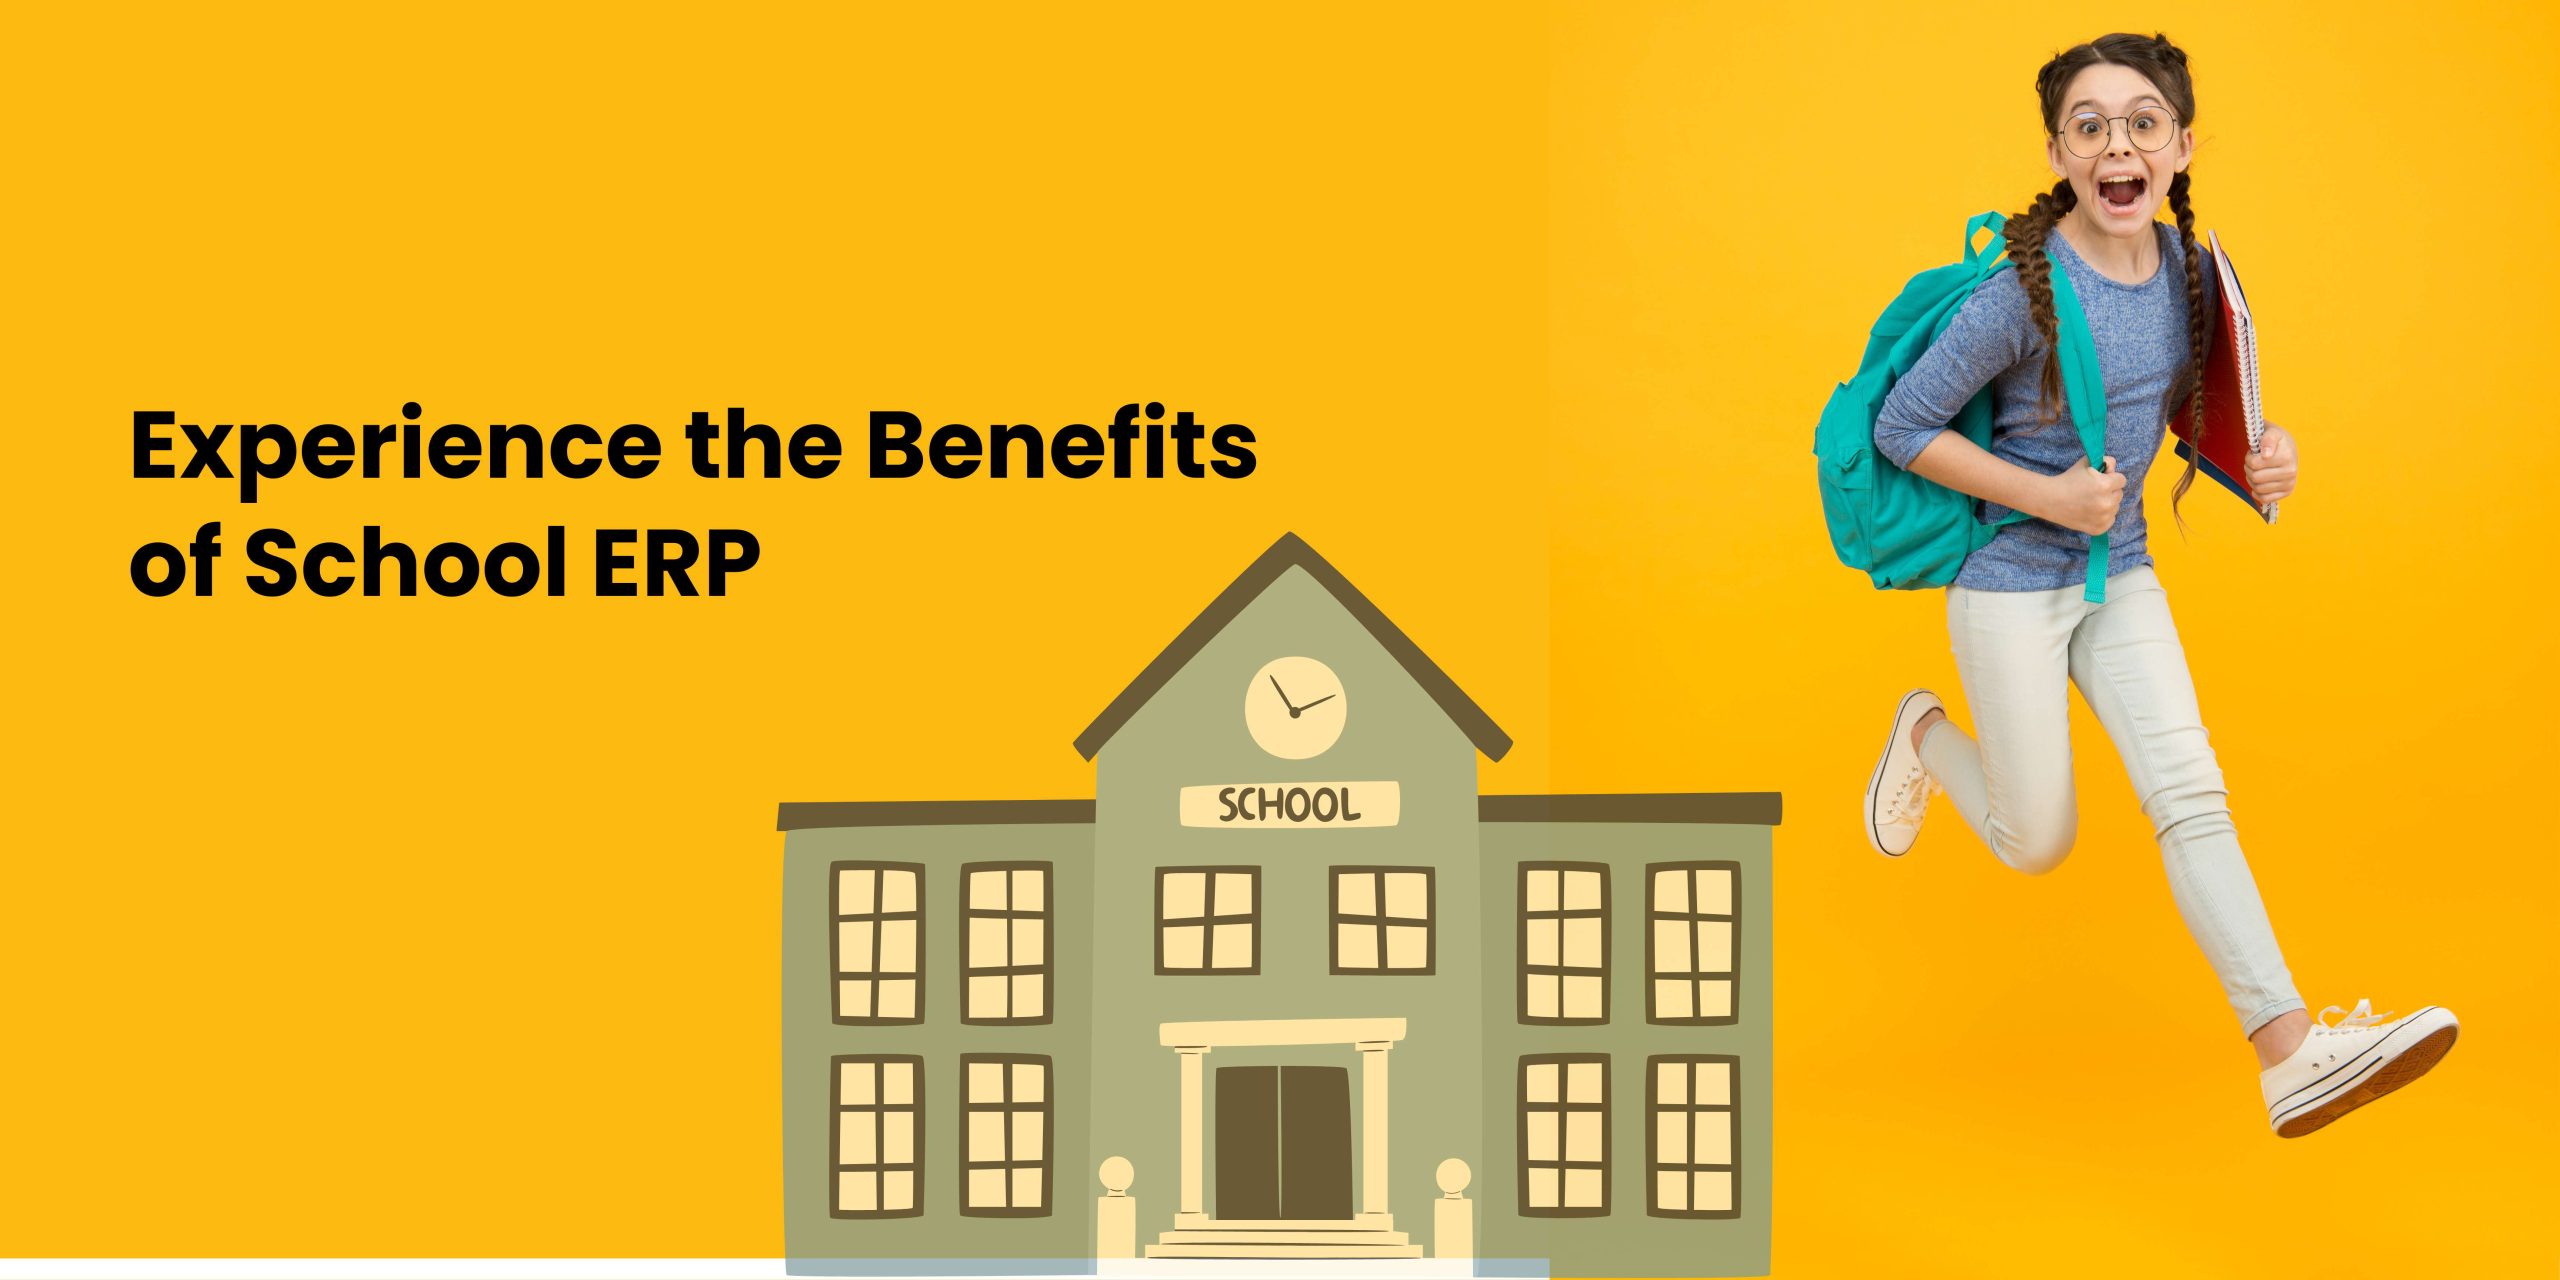 Experience the Benefits of School ERP